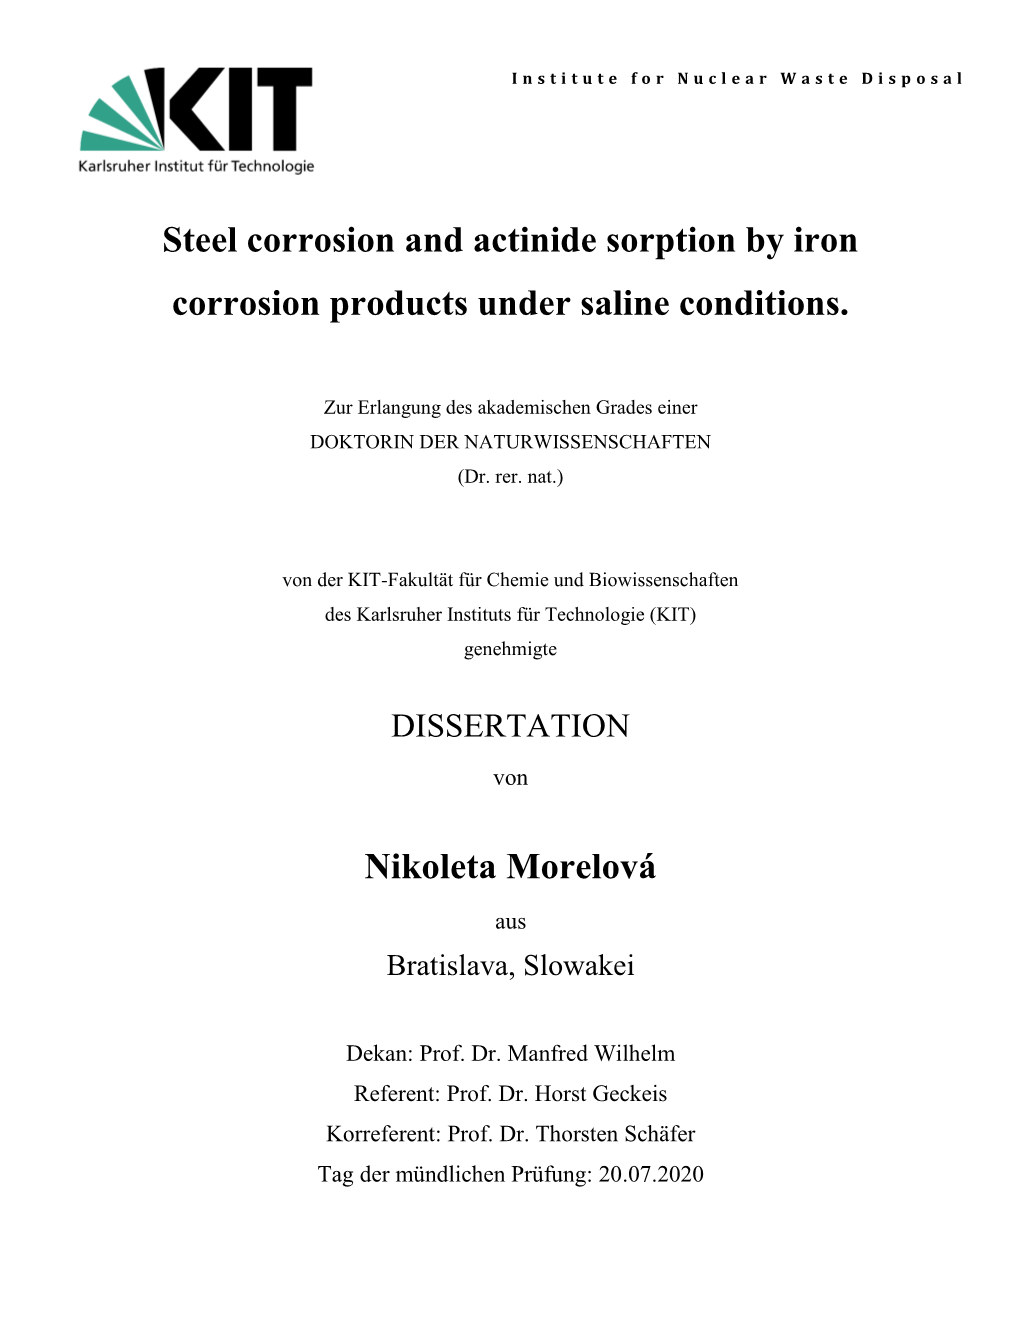 Steel Corrosion and Actinide Sorption by Iron Corrosion Products Under Saline Conditions